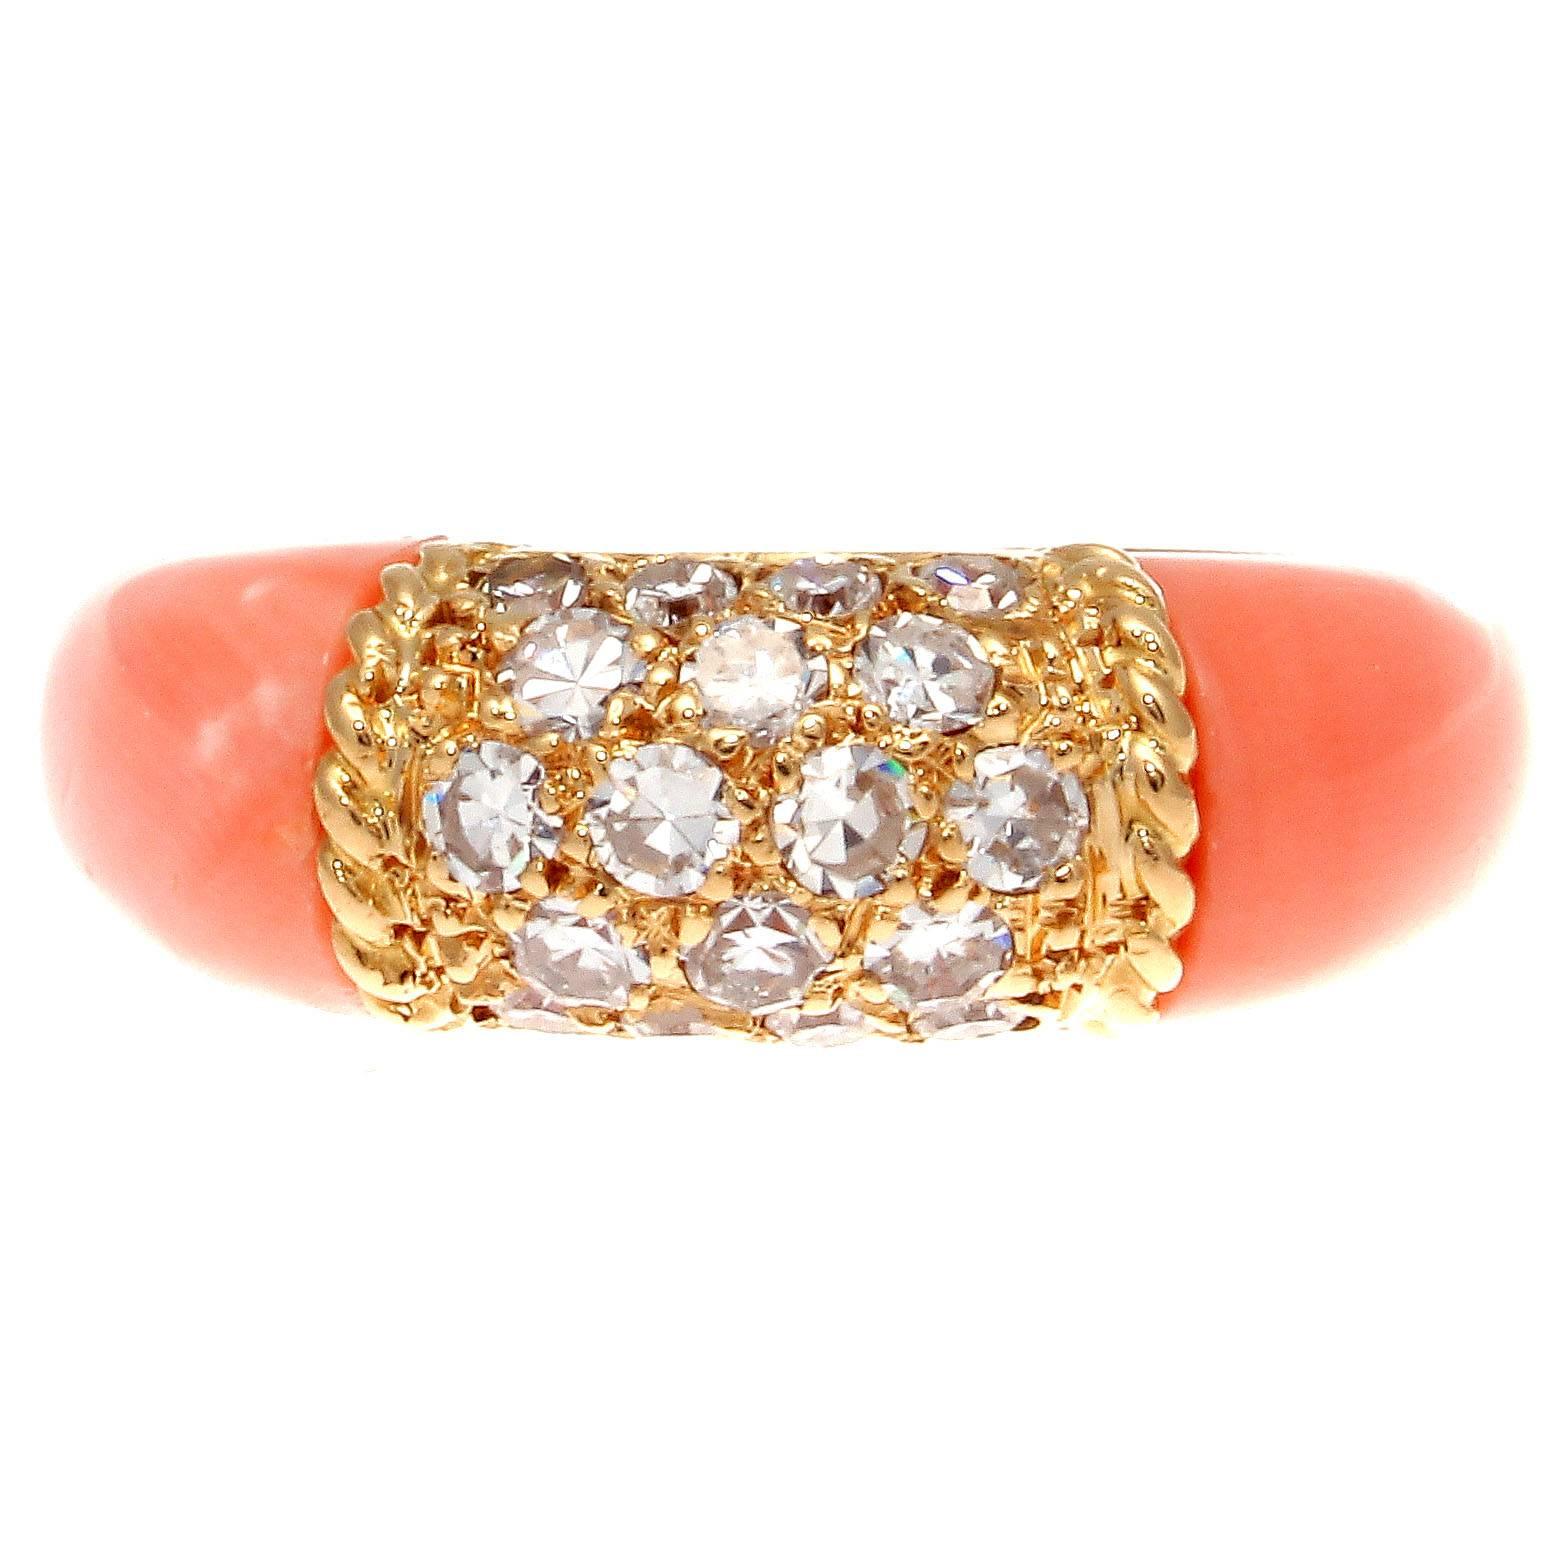 The classic Philippine ring from Van Cleef & Arpels. Designed with pave set diamonds in textured 18k yellow gold accented by glowing angel skin coral cascading down either side. Signed VCA, numbered and stamped with French hallmarks.

Ring size 4